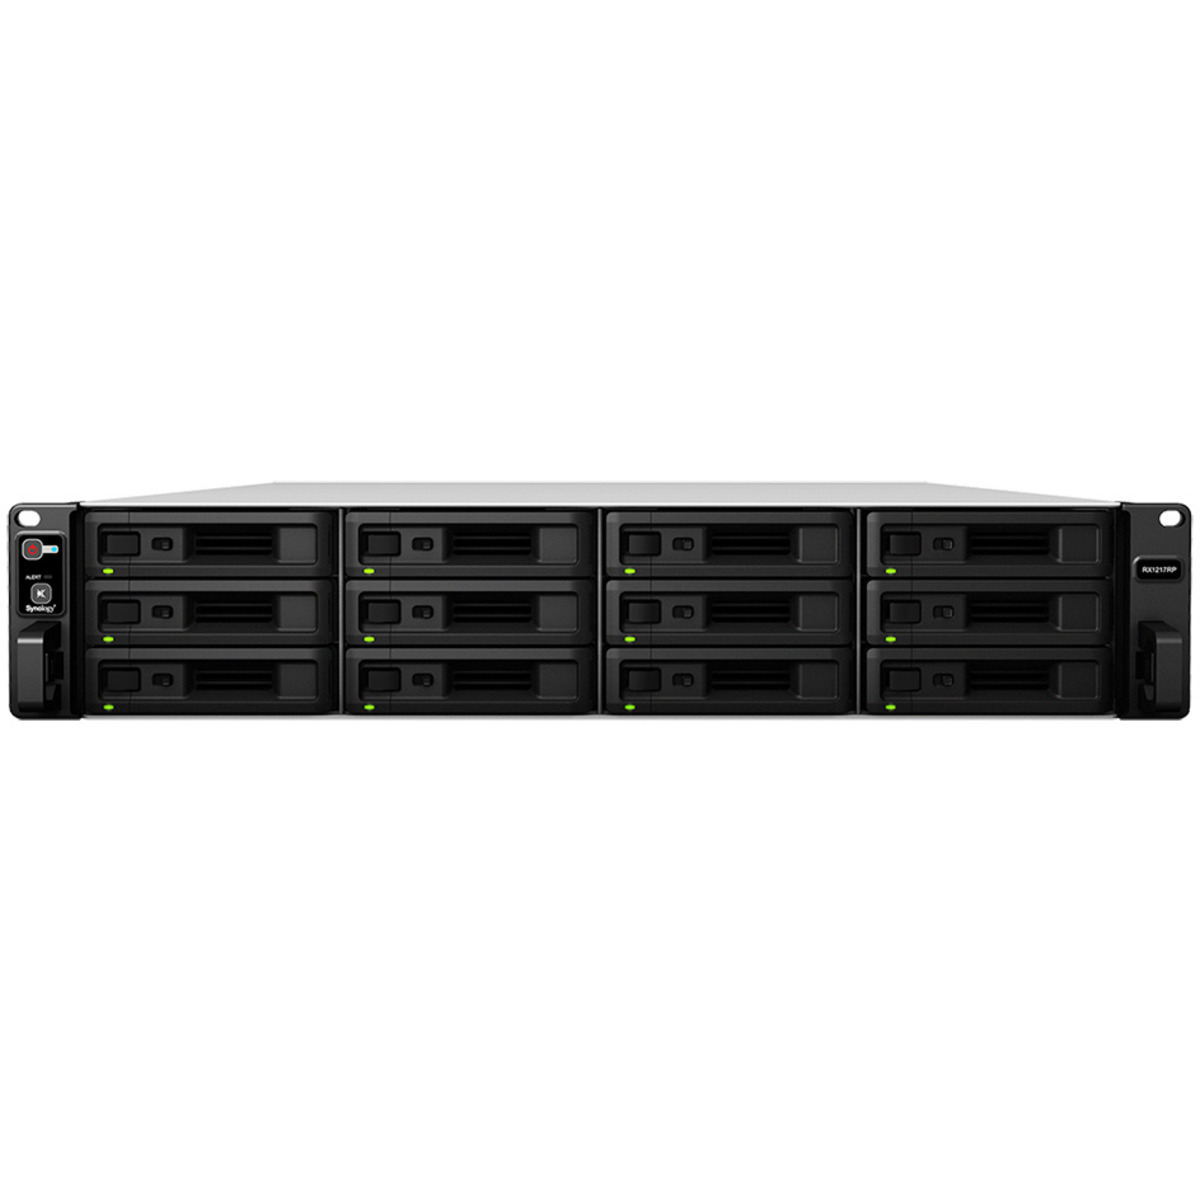 Synology RX1217 External Expansion Drive 12tb 12-Bay RackMount Large Business / Enterprise Expansion Enclosure 12x1tb Western Digital Red SA500 WDS100T1R0A 2.5 560/530MB/s SATA 6Gb/s SSD NAS Class Drives Installed - Burn-In Tested RX1217 External Expansion Drive